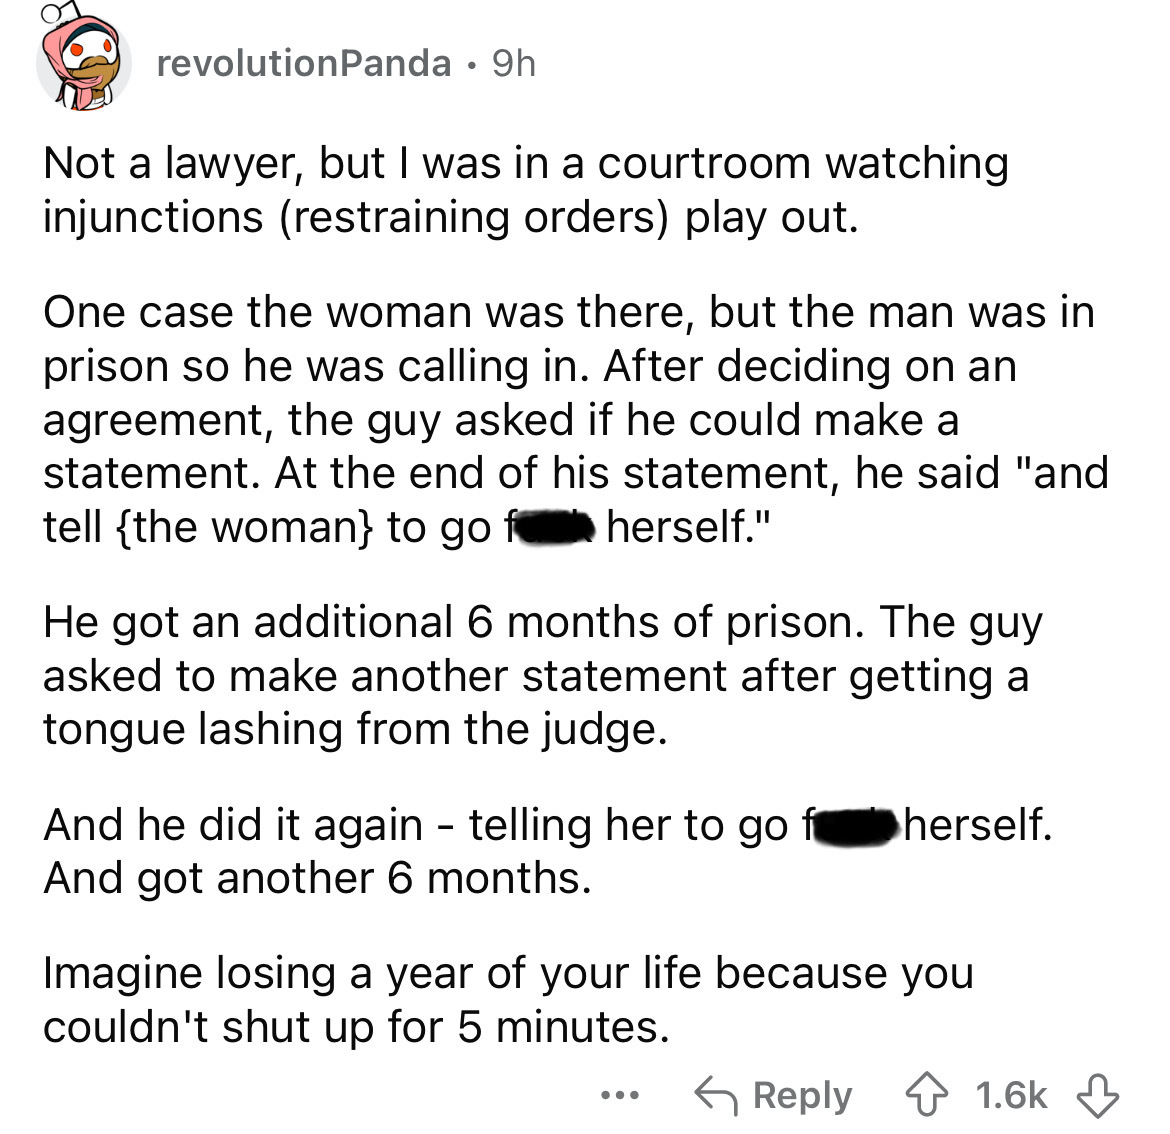 screenshot - revolutionPanda 9h Not a lawyer, but I was in a courtroom watching injunctions restraining orders play out. One case the woman was there, but the man was in prison so he was calling in. After deciding on an agreement, the guy asked if he coul